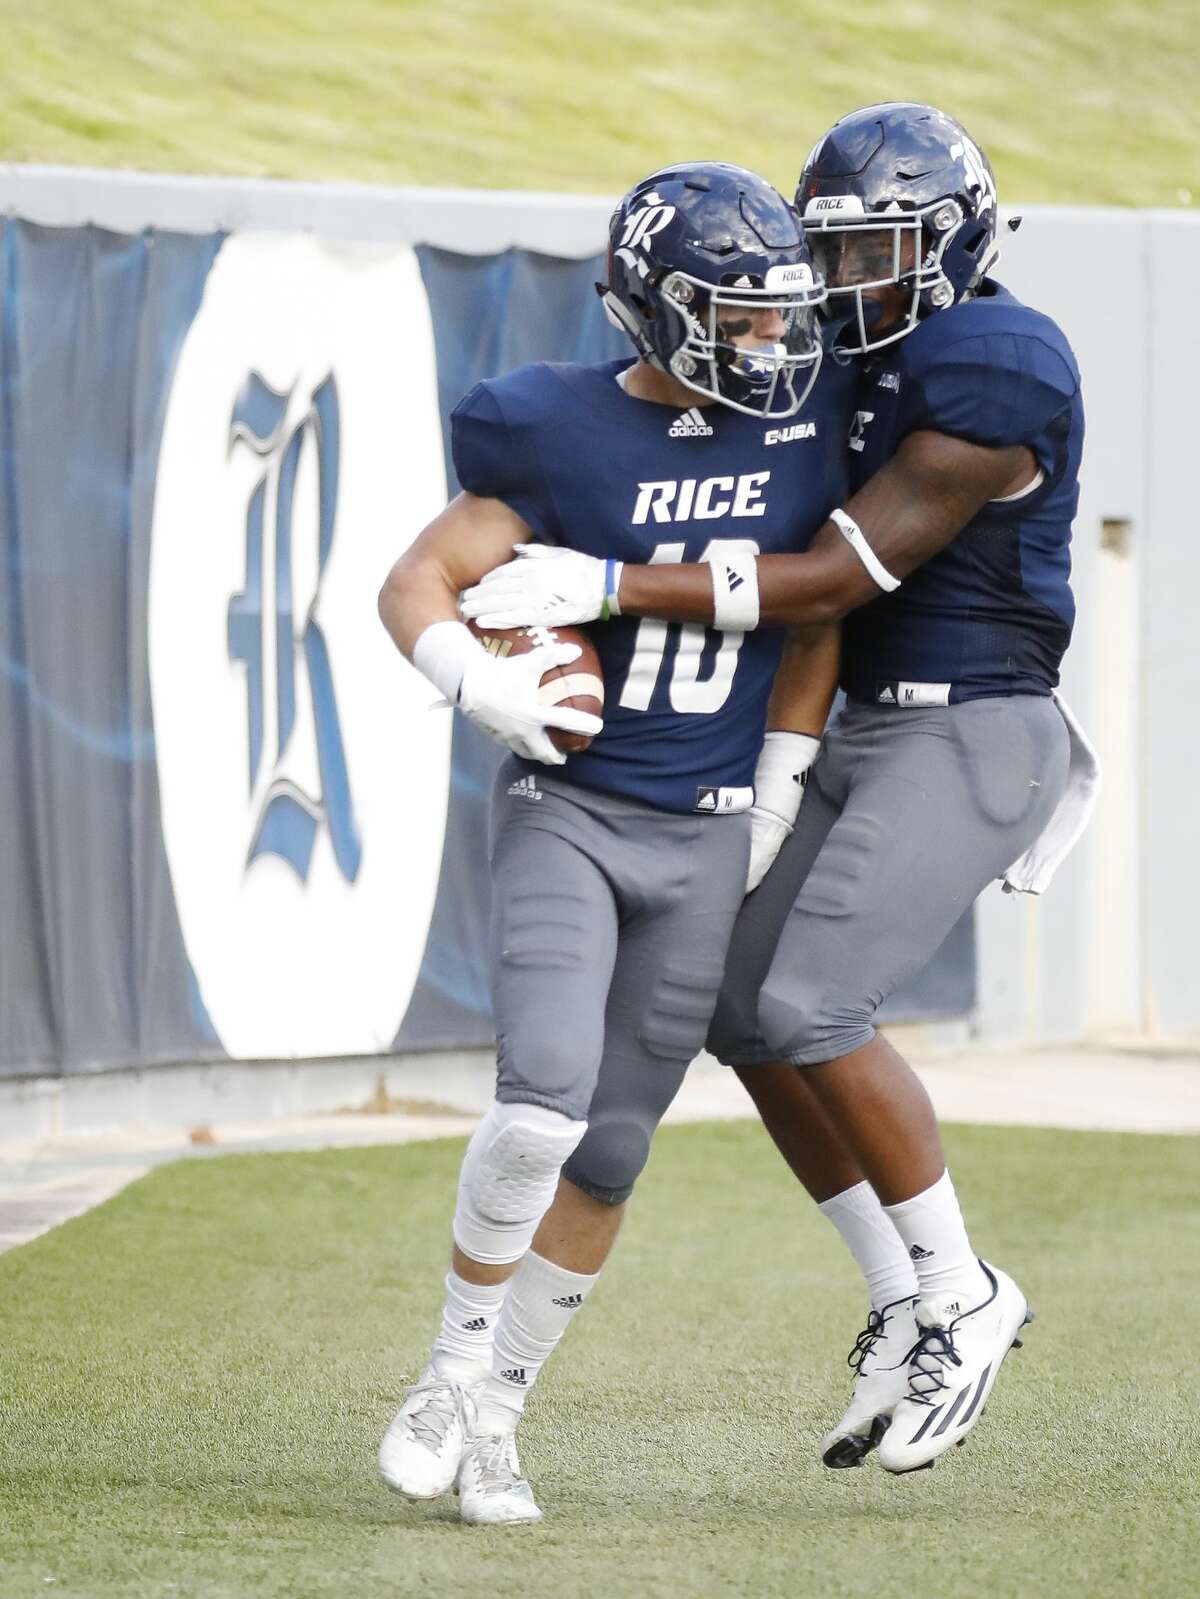 Rice Owls wide receiver Austin Trammell (10) his touchdown with running back Aston Walter (1) during the fourth quarter of a college football game at Rice Stadium, Saturday, Nov. 3, 2018, in Houston.